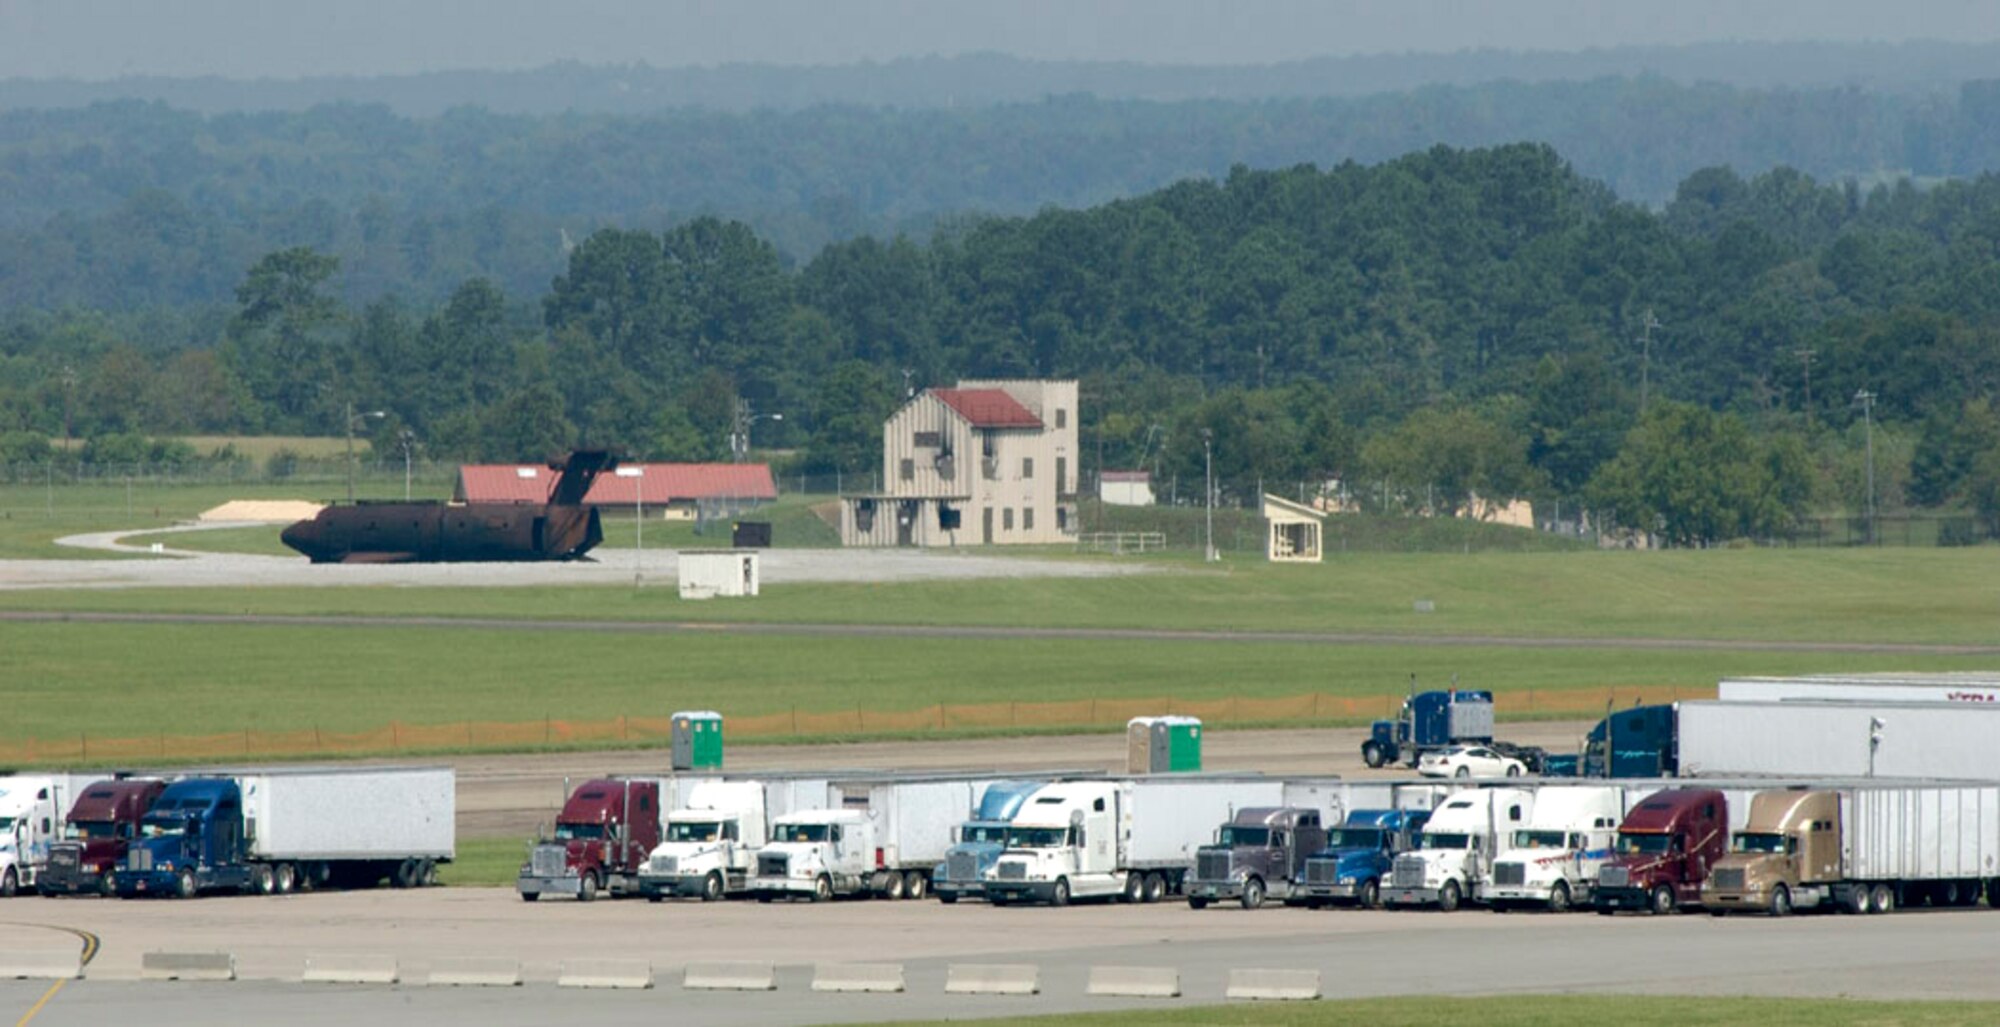 MAXWELL AIR FORCE BASE, Ala. -- Semi-trucks sit at this staging facility for hurricane assistance.  The Federal Emergency Management Agency trucks carried ice, packaged meals and water to hurricane evacuees.  (U.S. Air Force photo by Master Sgt. Jack Braden)